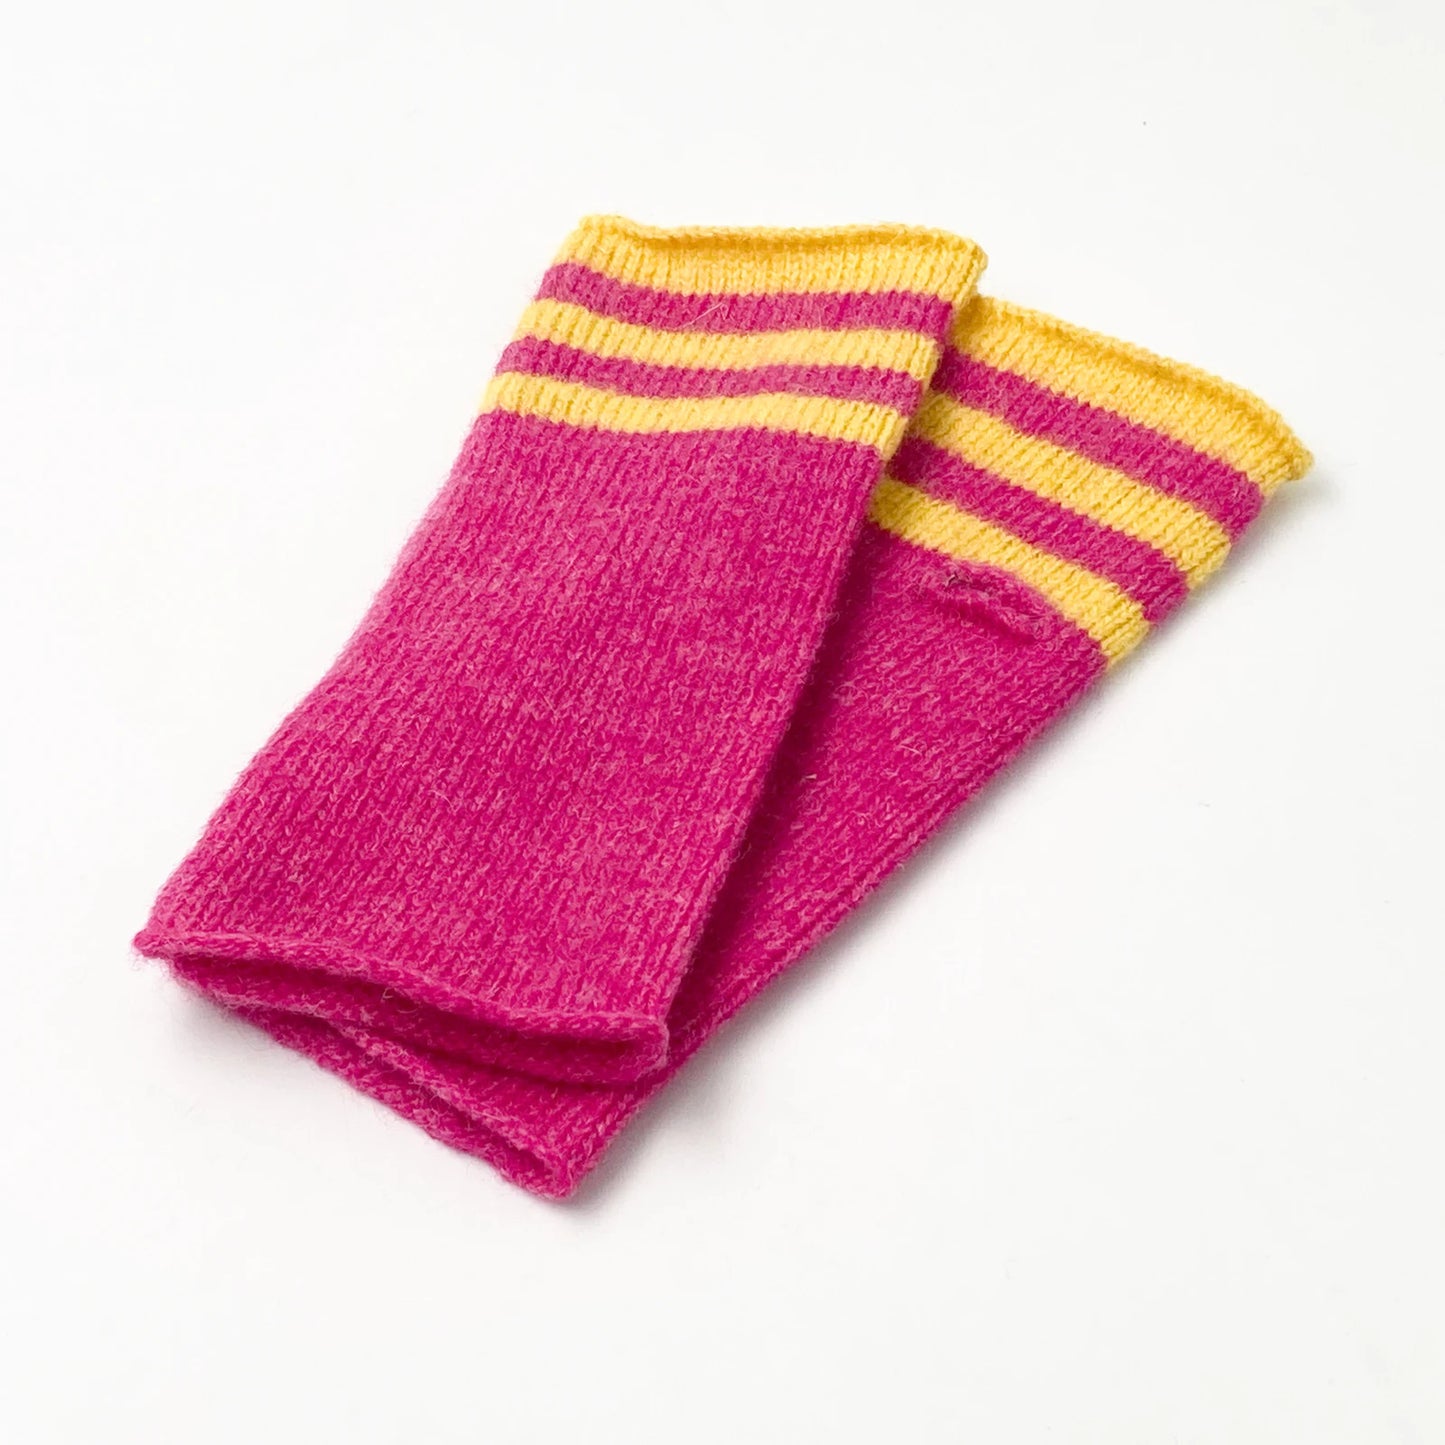 gloves - pink & yellow